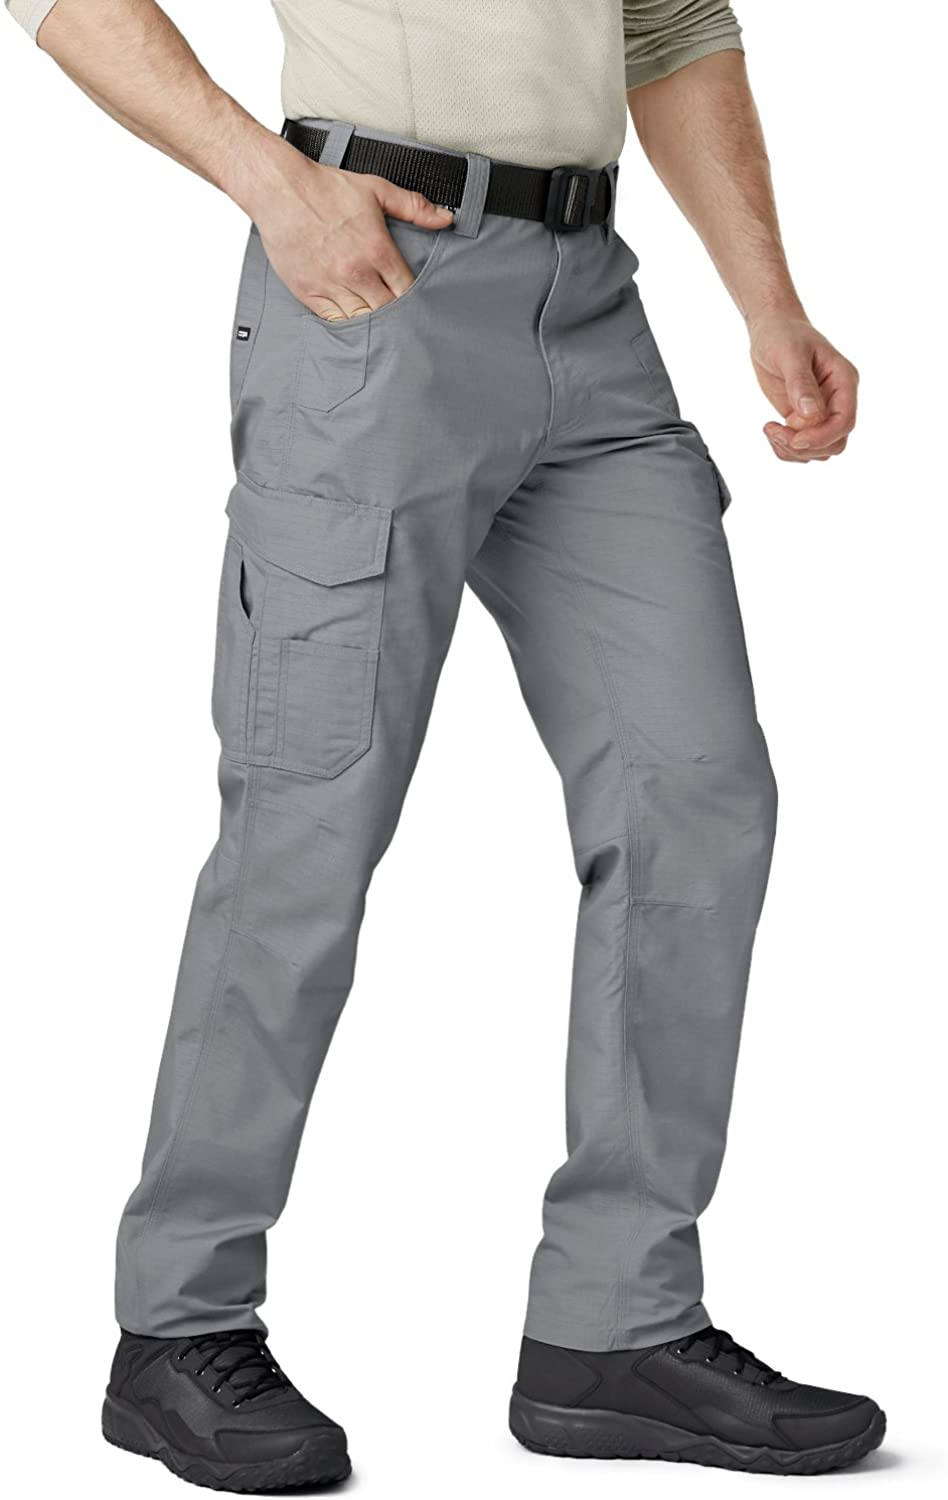 Water Repellent Tactical Pants Outdoor Utility Operator EDC Straight/Cargo Pants CQR Mens Ripstop Work Pants 